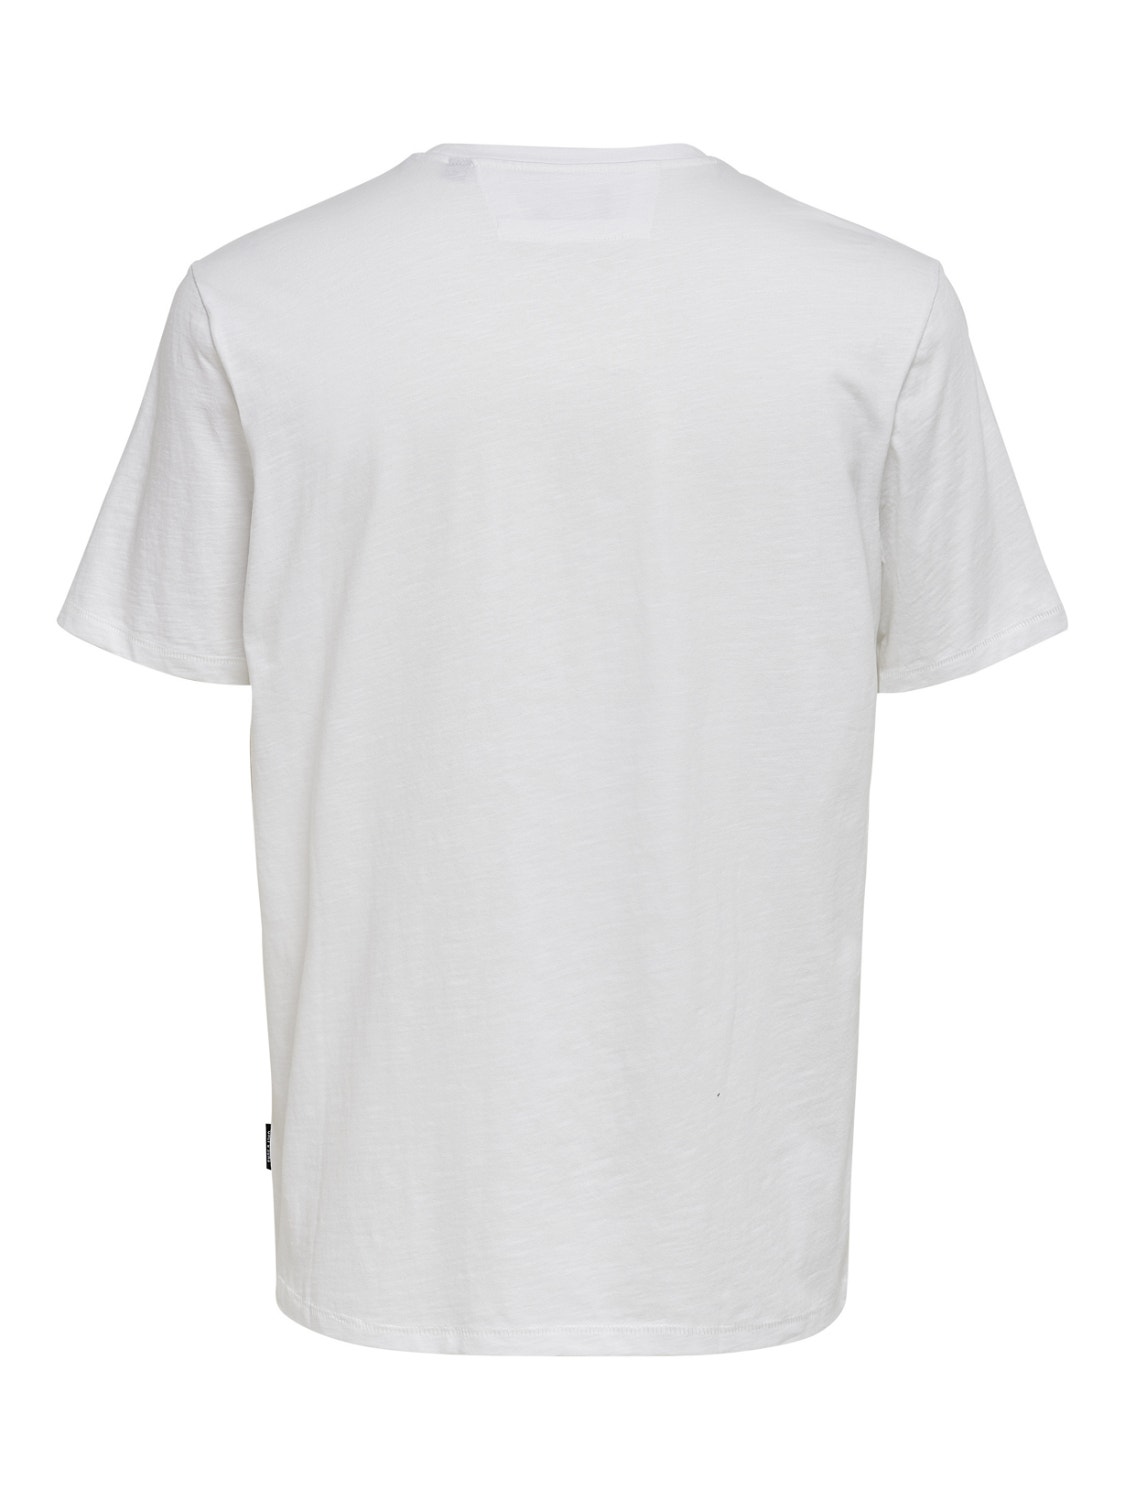 ONLY & SONS O-hals t-shirt -White - 22020074